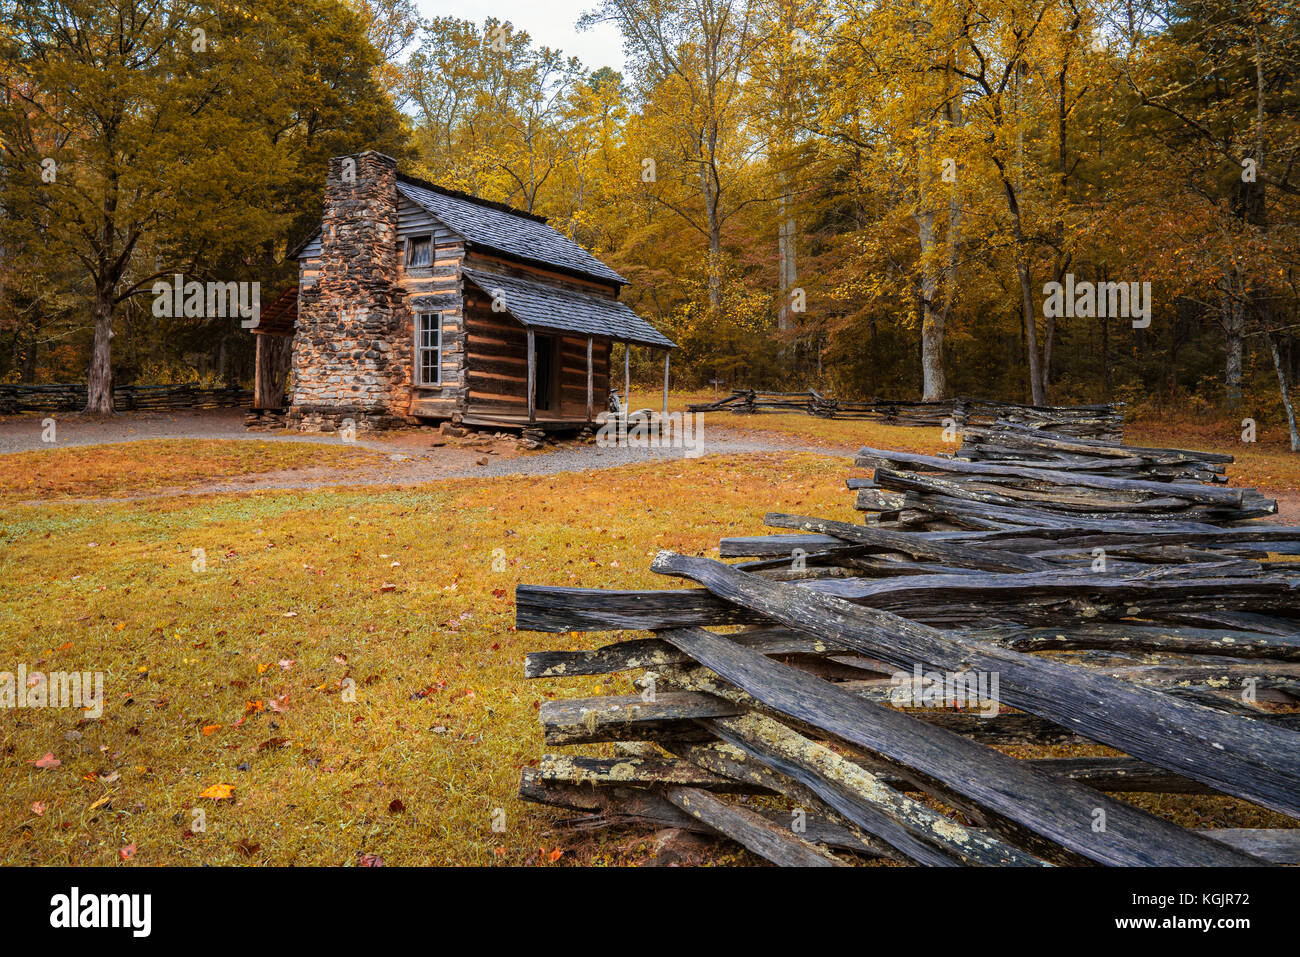 GATLINBURG, TN - OCT 8: Autumn at the John Oliver Cabin in Cades Cove in Great Smoky Mountains National Park, Tennessee on October 8, 2017. Stock Photo